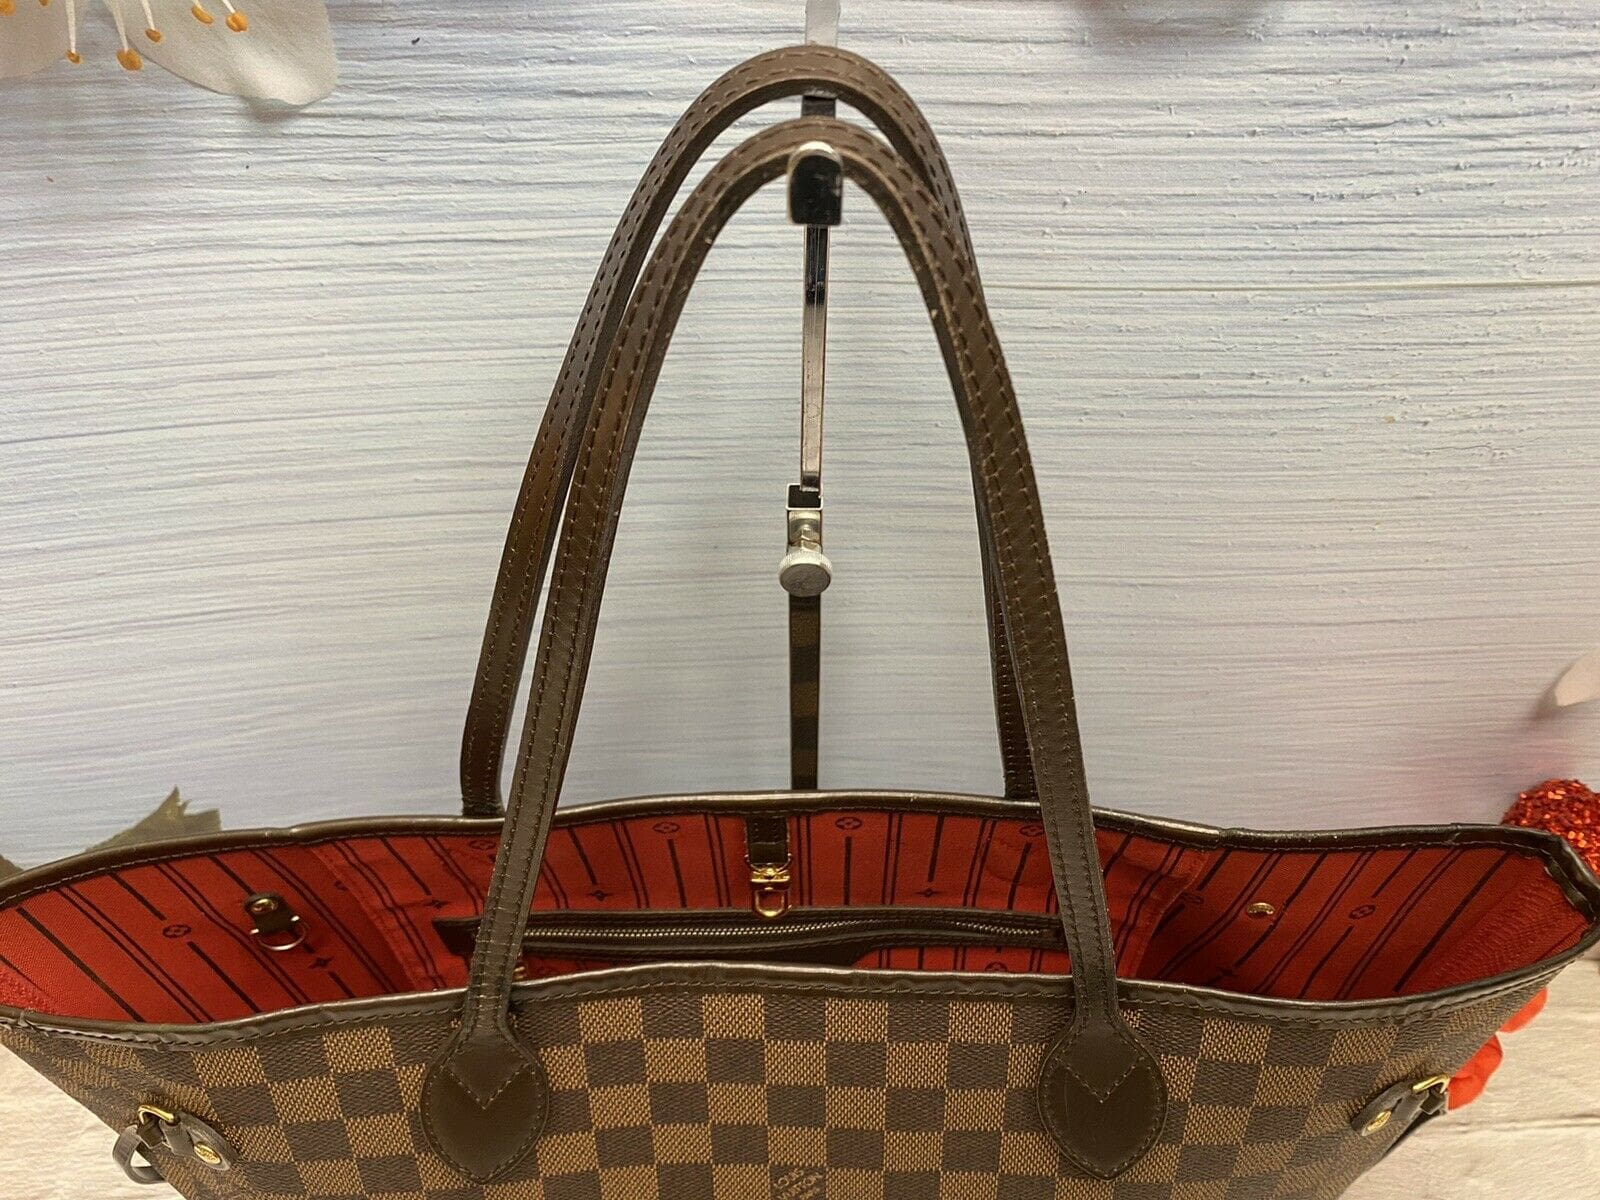 Limited Edition Neverfull GM Monogram Rayures (CA4111) - Reetzy